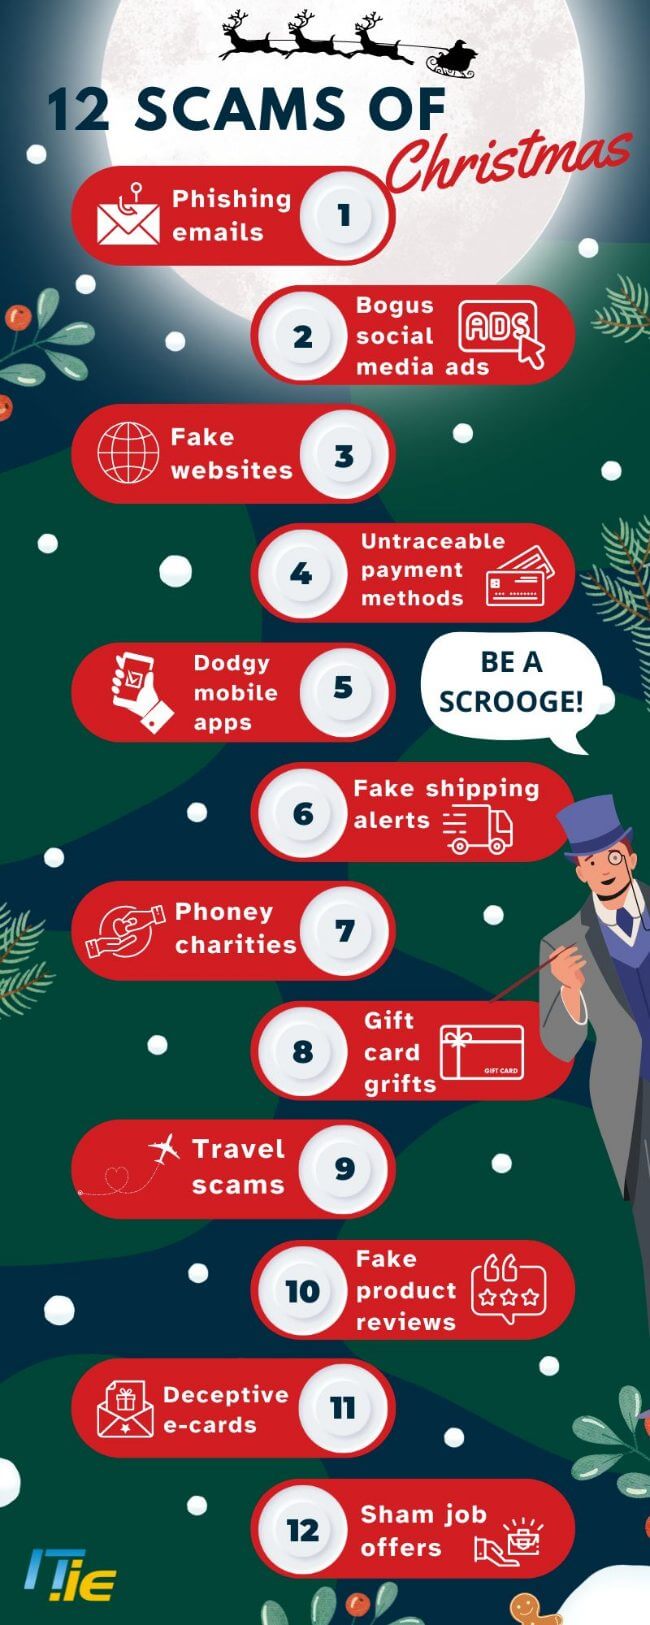 Infographic detailing typical cyber scams over Christmas season.